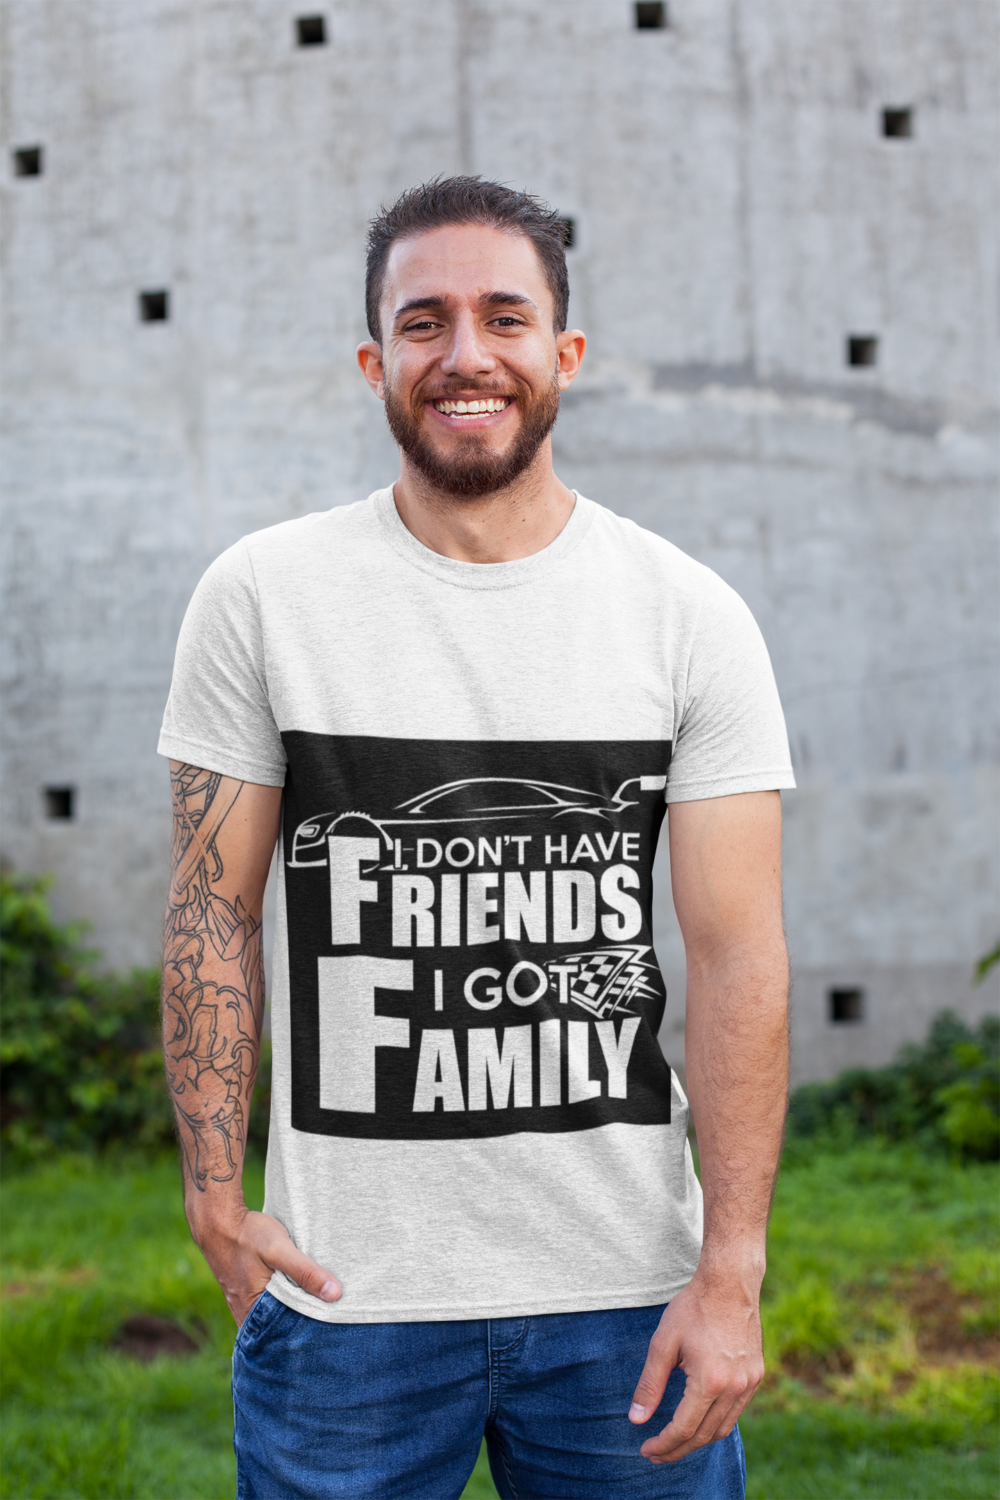 t shirt mockup featuring a smiling man with a tattooed arm 28619 1